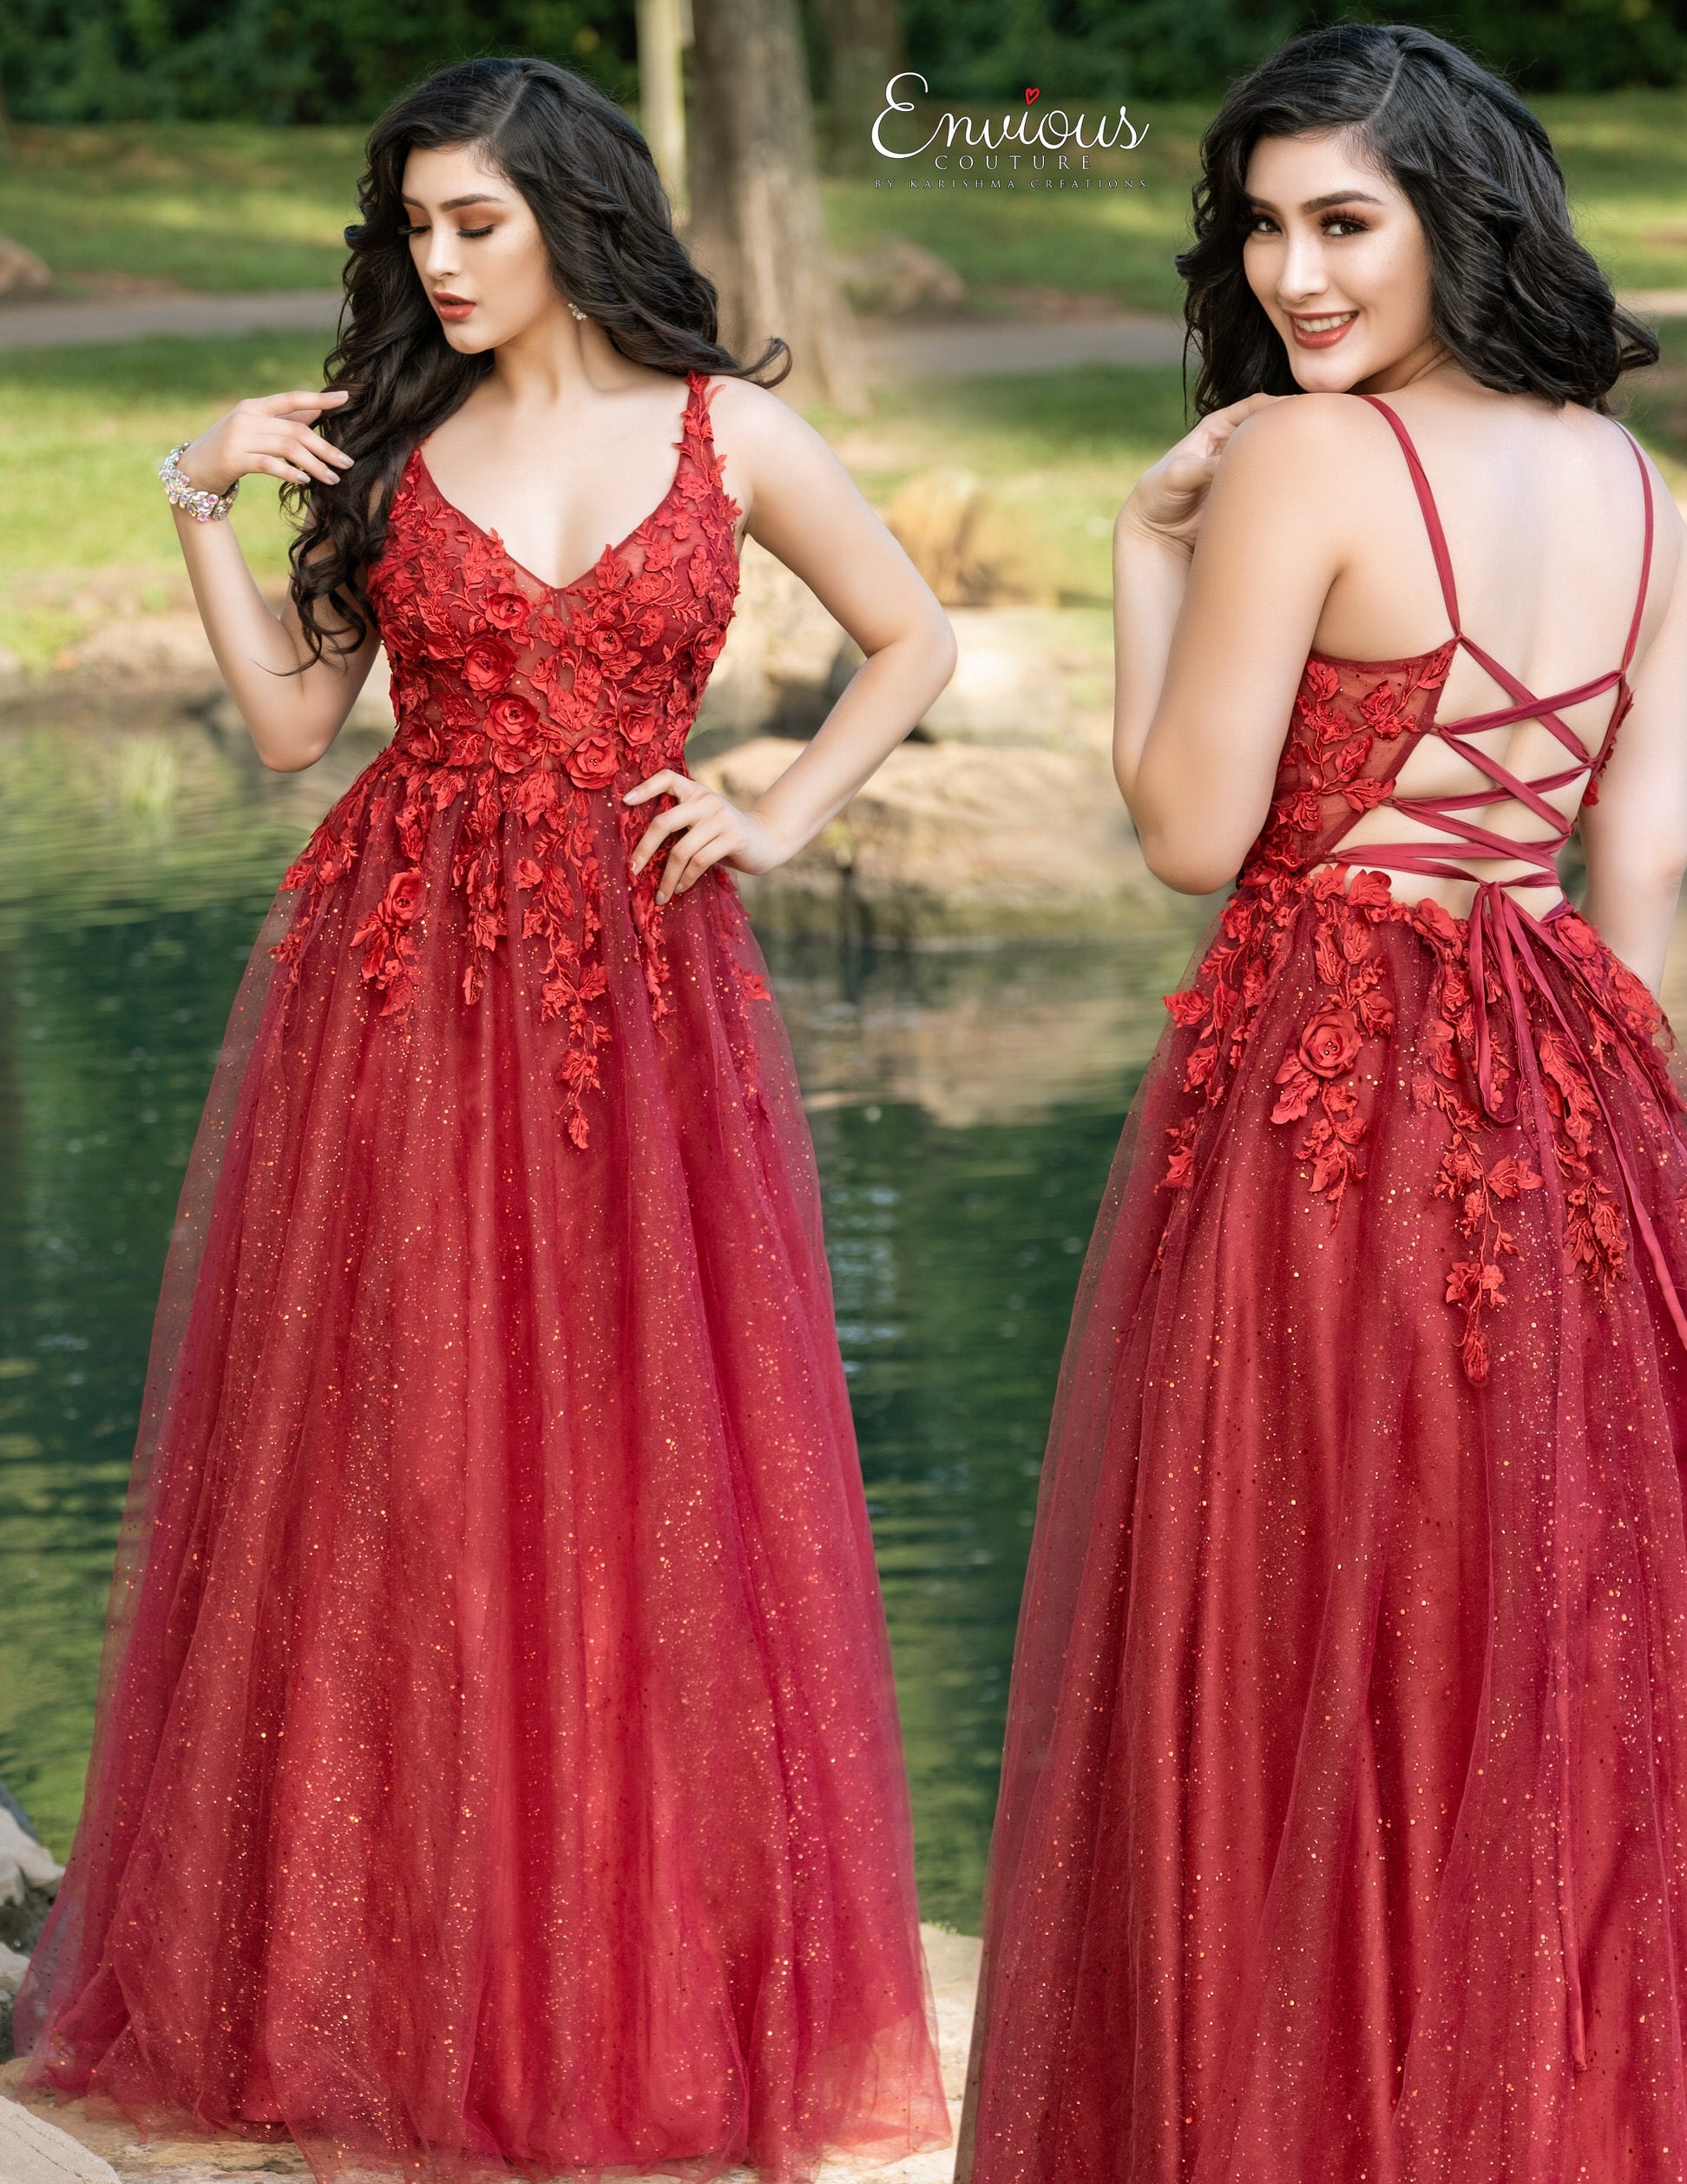 Envious Couture E1628 V neckline prom dress with 3D floral details on the sheer bodice that flow down the glitter tulle skirt.  This evening gown has a lace up corset tie in the open back. Make a statement at your next formal event, pageant or prom. Available colors:  Wine, Nude, Royal  Available sizes:  00, 0, 2, 4, 6, 8, 10, 12, 14, 16, 18, 20